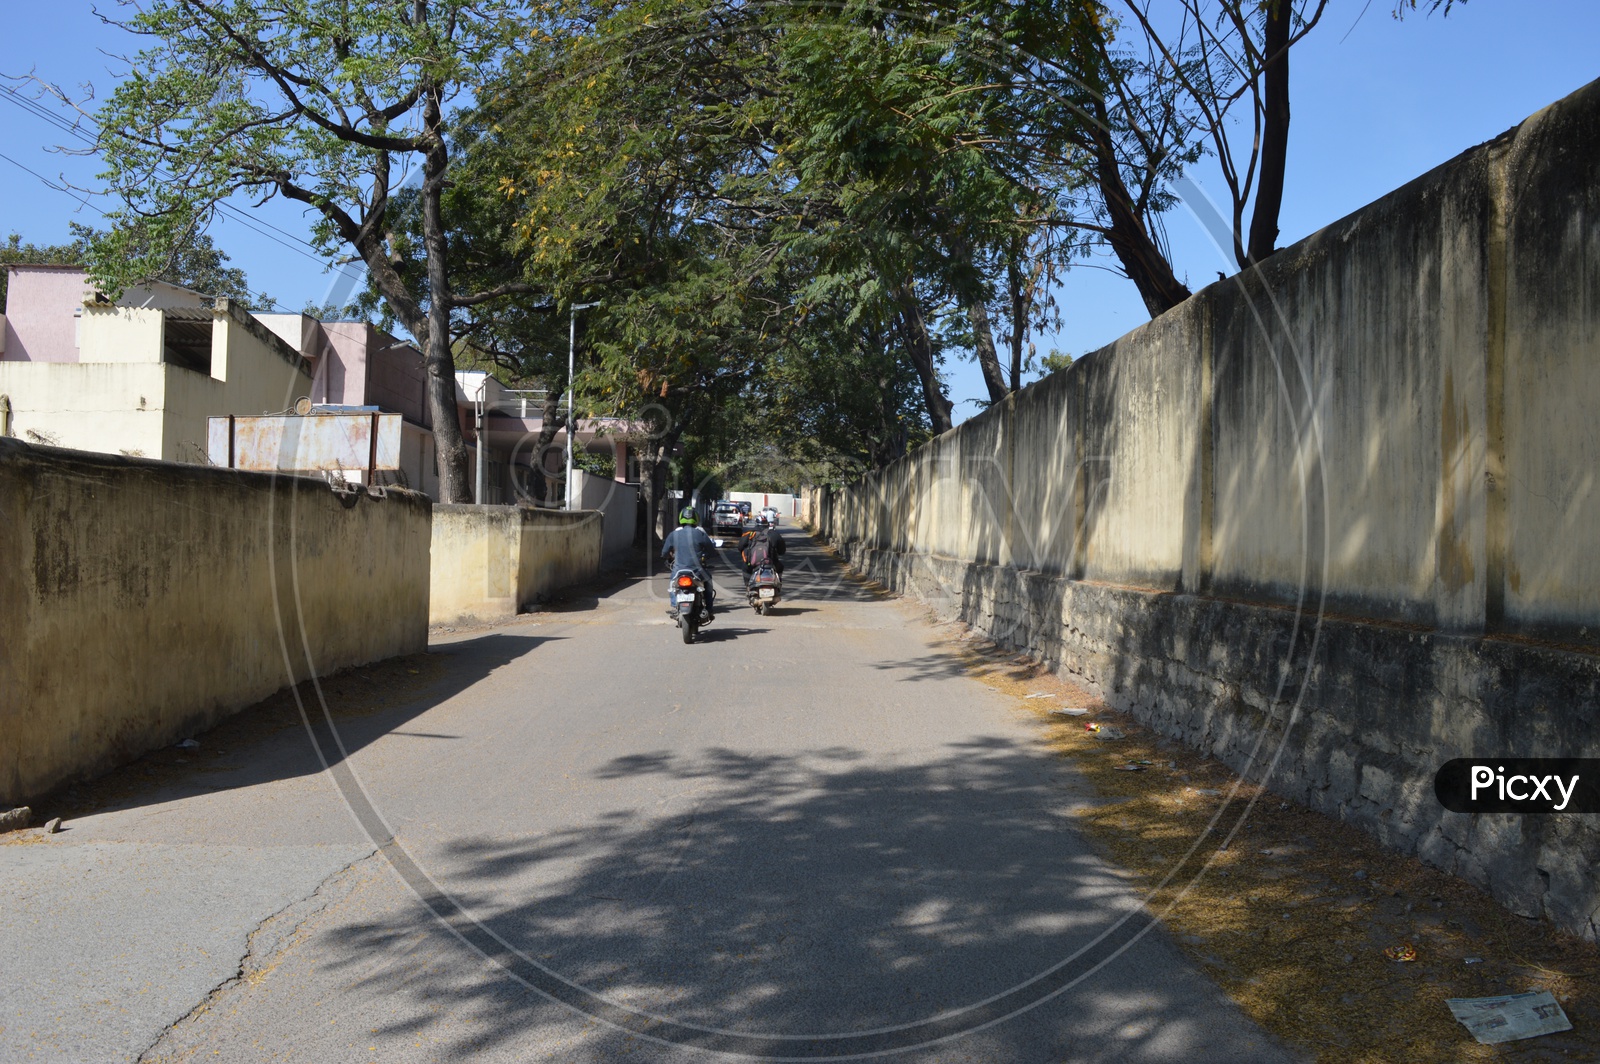 Streets And Roads In a Residential Colony